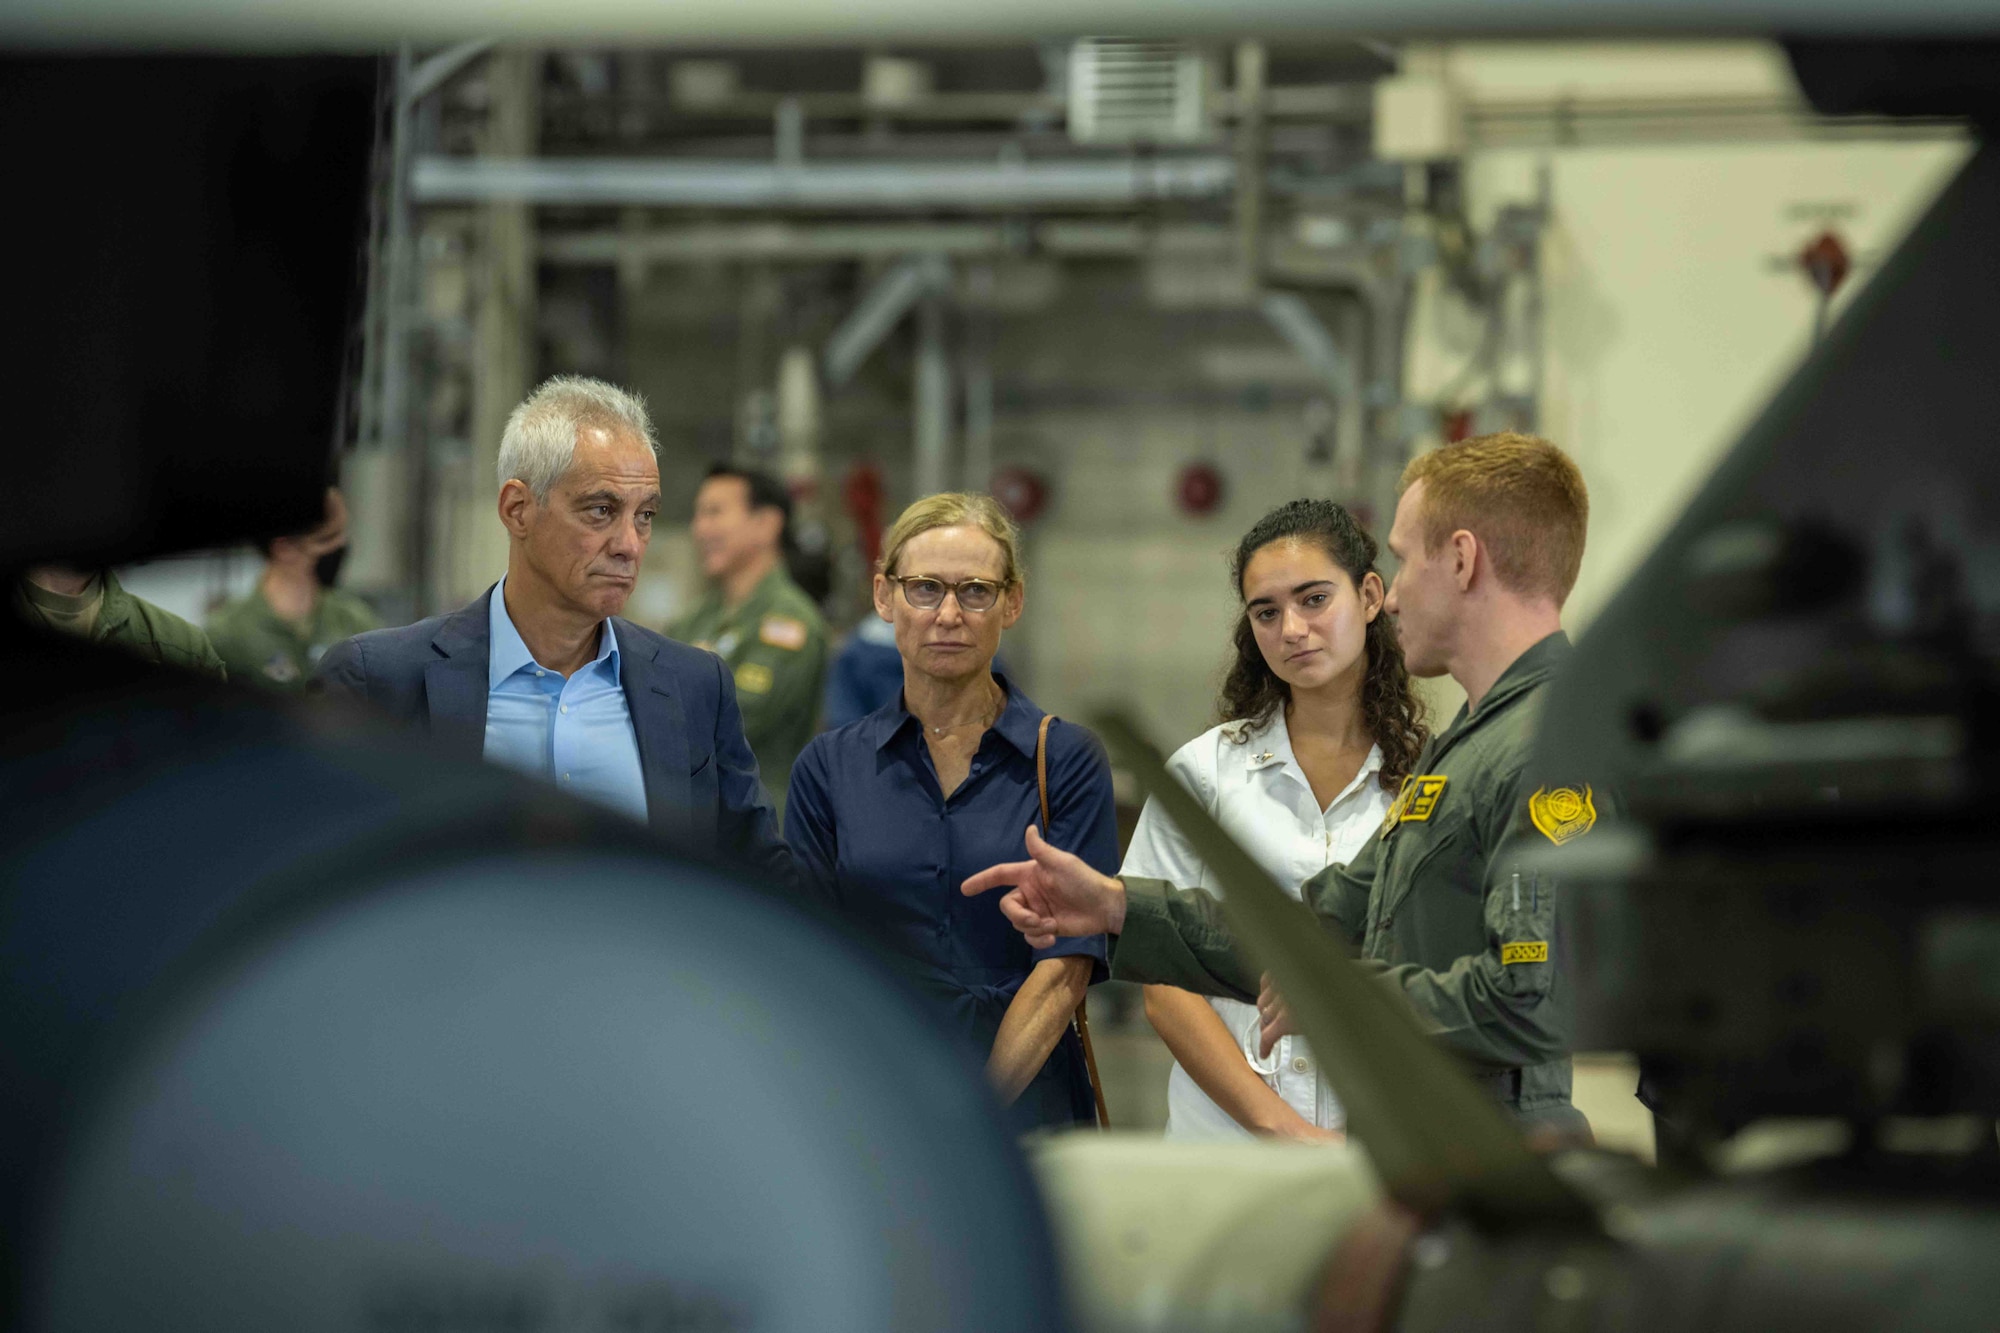 Rahm Emanuel, U.S. Ambassador to Japan, listens to a U.S. Air Force Airman brief about the F-16 Fighting Falcon during the ambassador’s visit at Misawa Air Base, Japan, July 22, 2022.